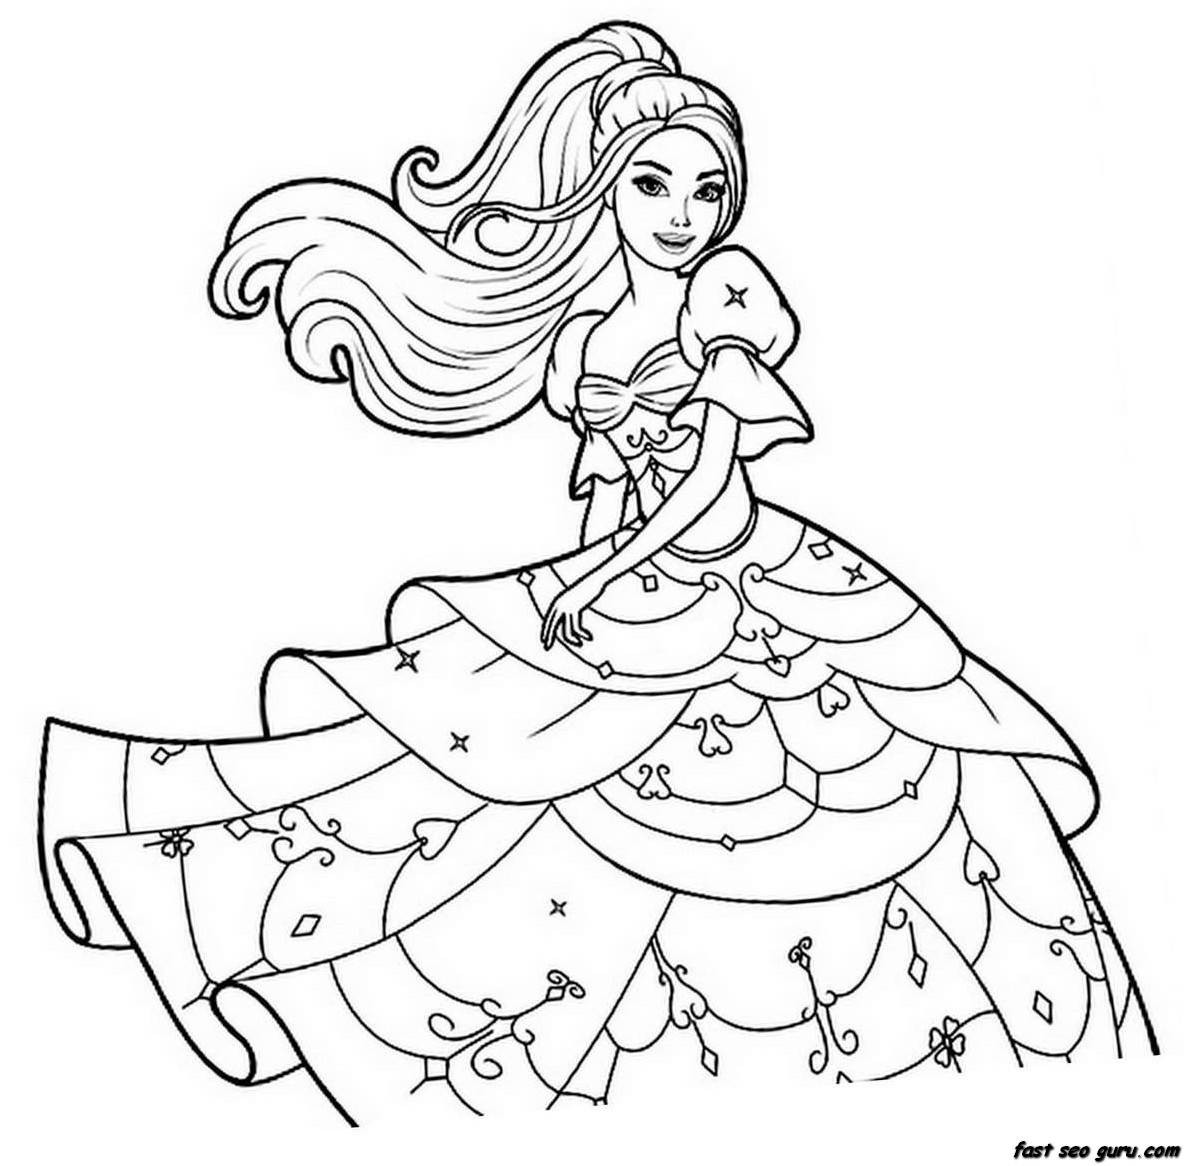 Printable Coloring Pages For Girls
 coloring pages for girls